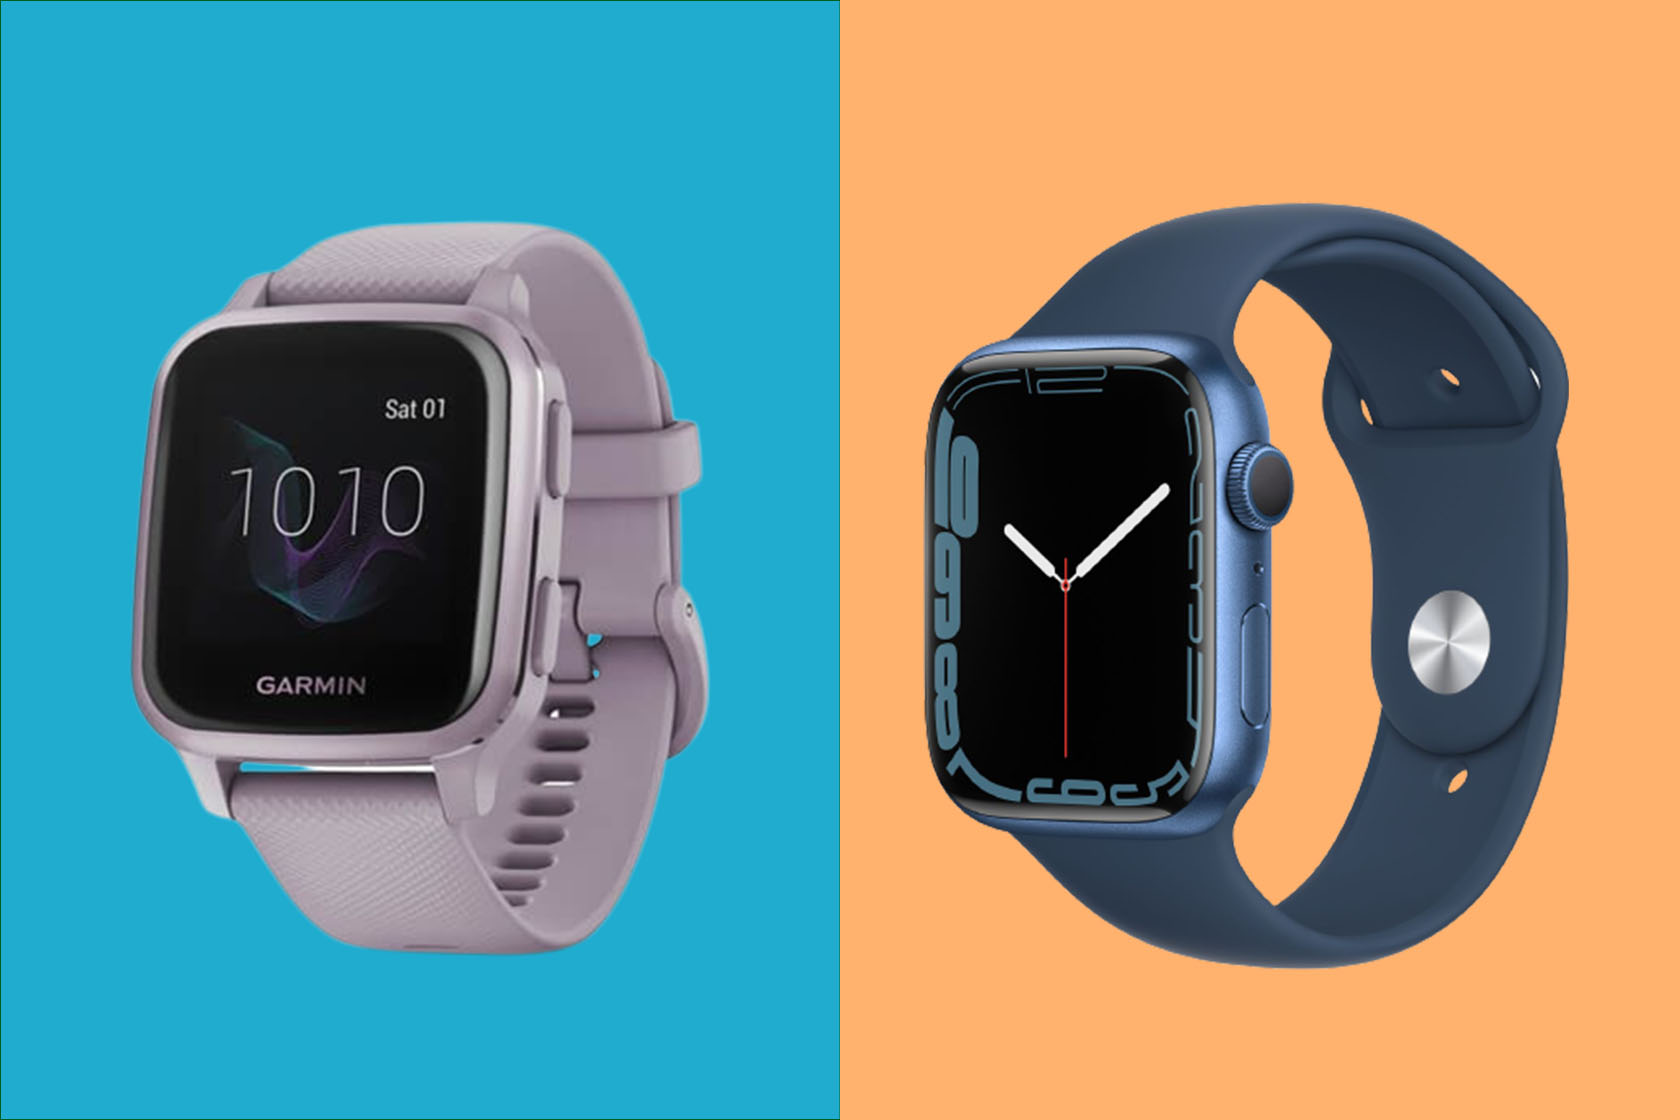 sej Duplikere tragt Apple Watch vs. Garmin SmartWatch: how to choose the right one